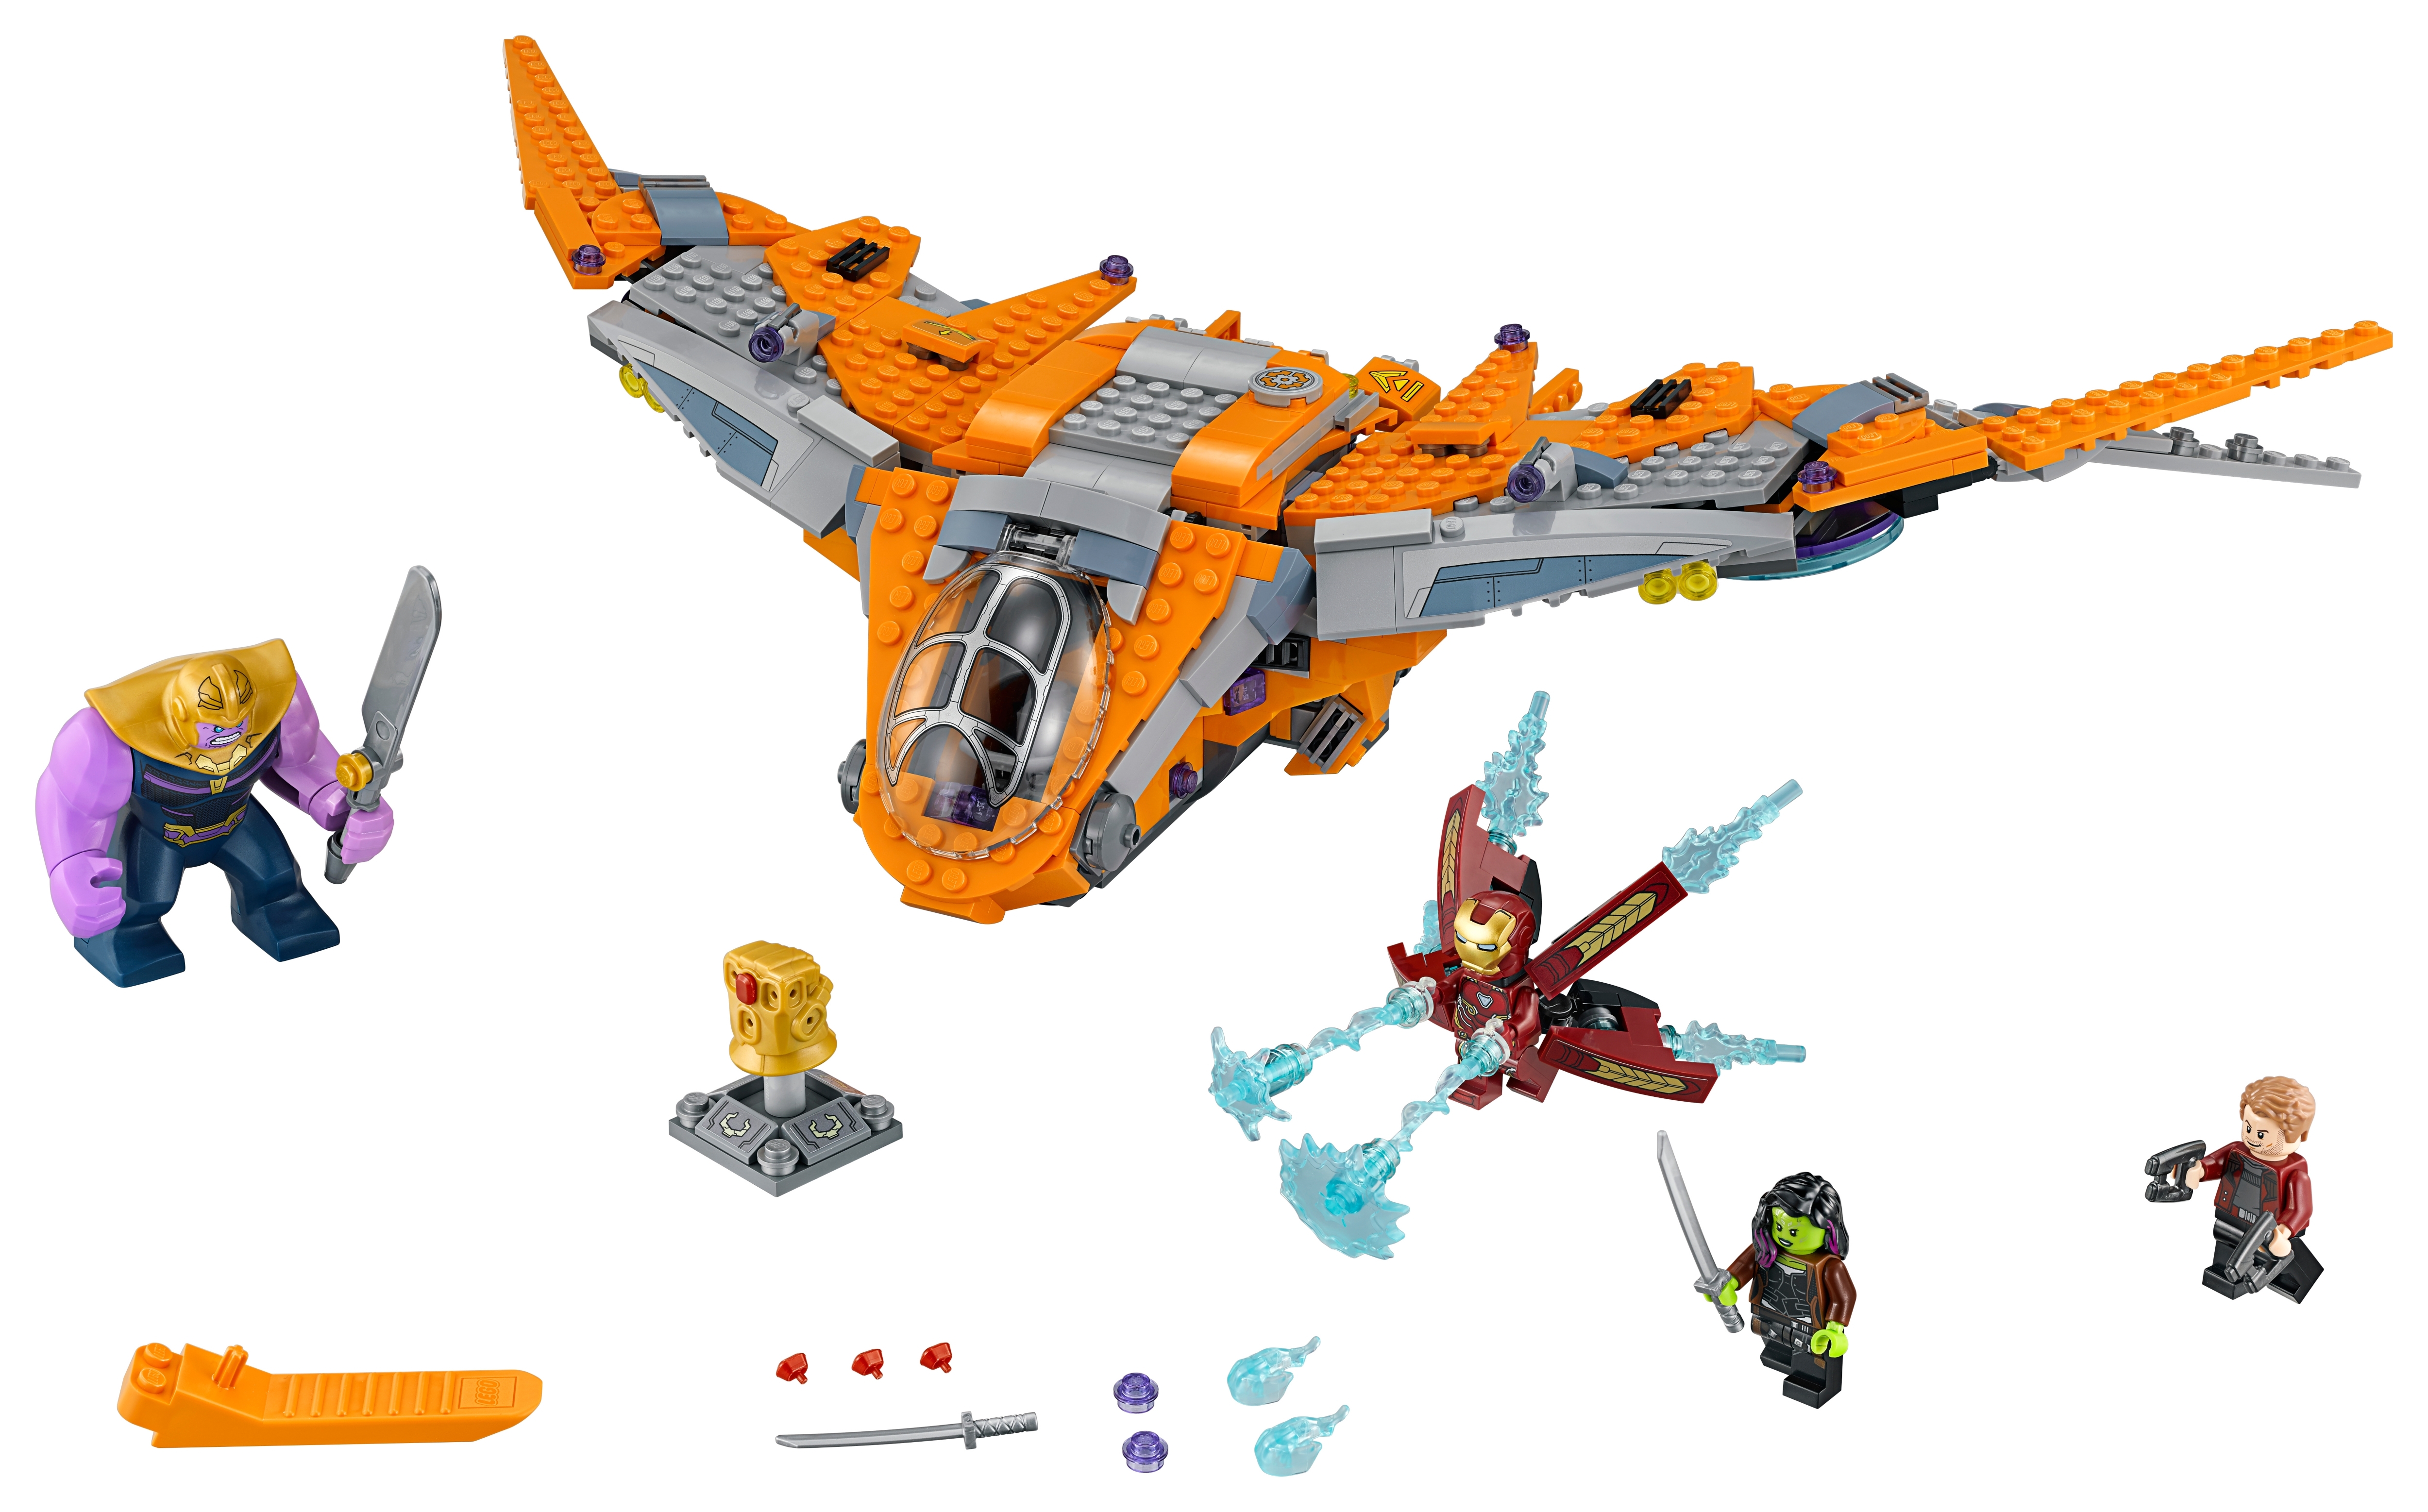 Thanos: Ultimate Battle 76107 | Marvel | Buy online at the Official LEGO®  Shop US